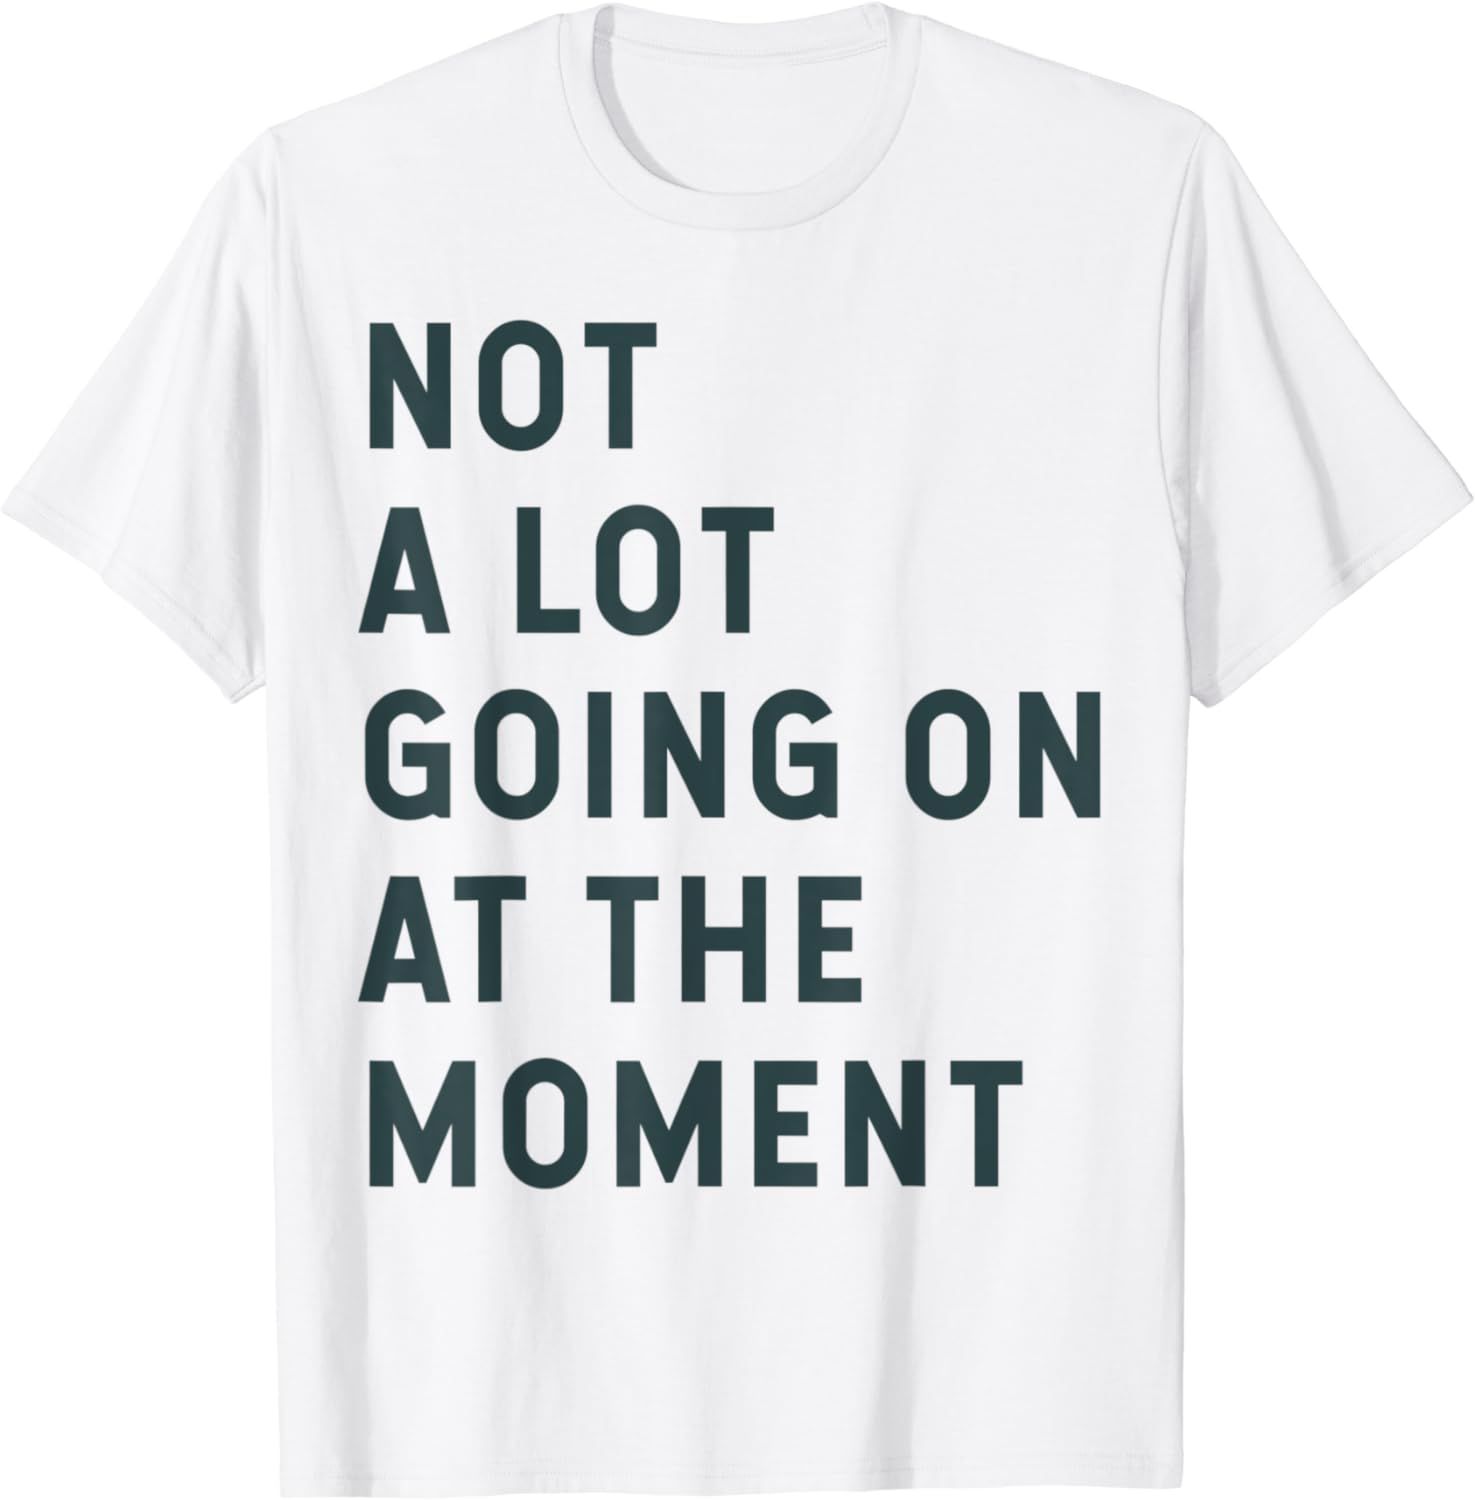 NOT A LOT GOING ON AT THE MOMENT T-Shirt | Amazon (US)